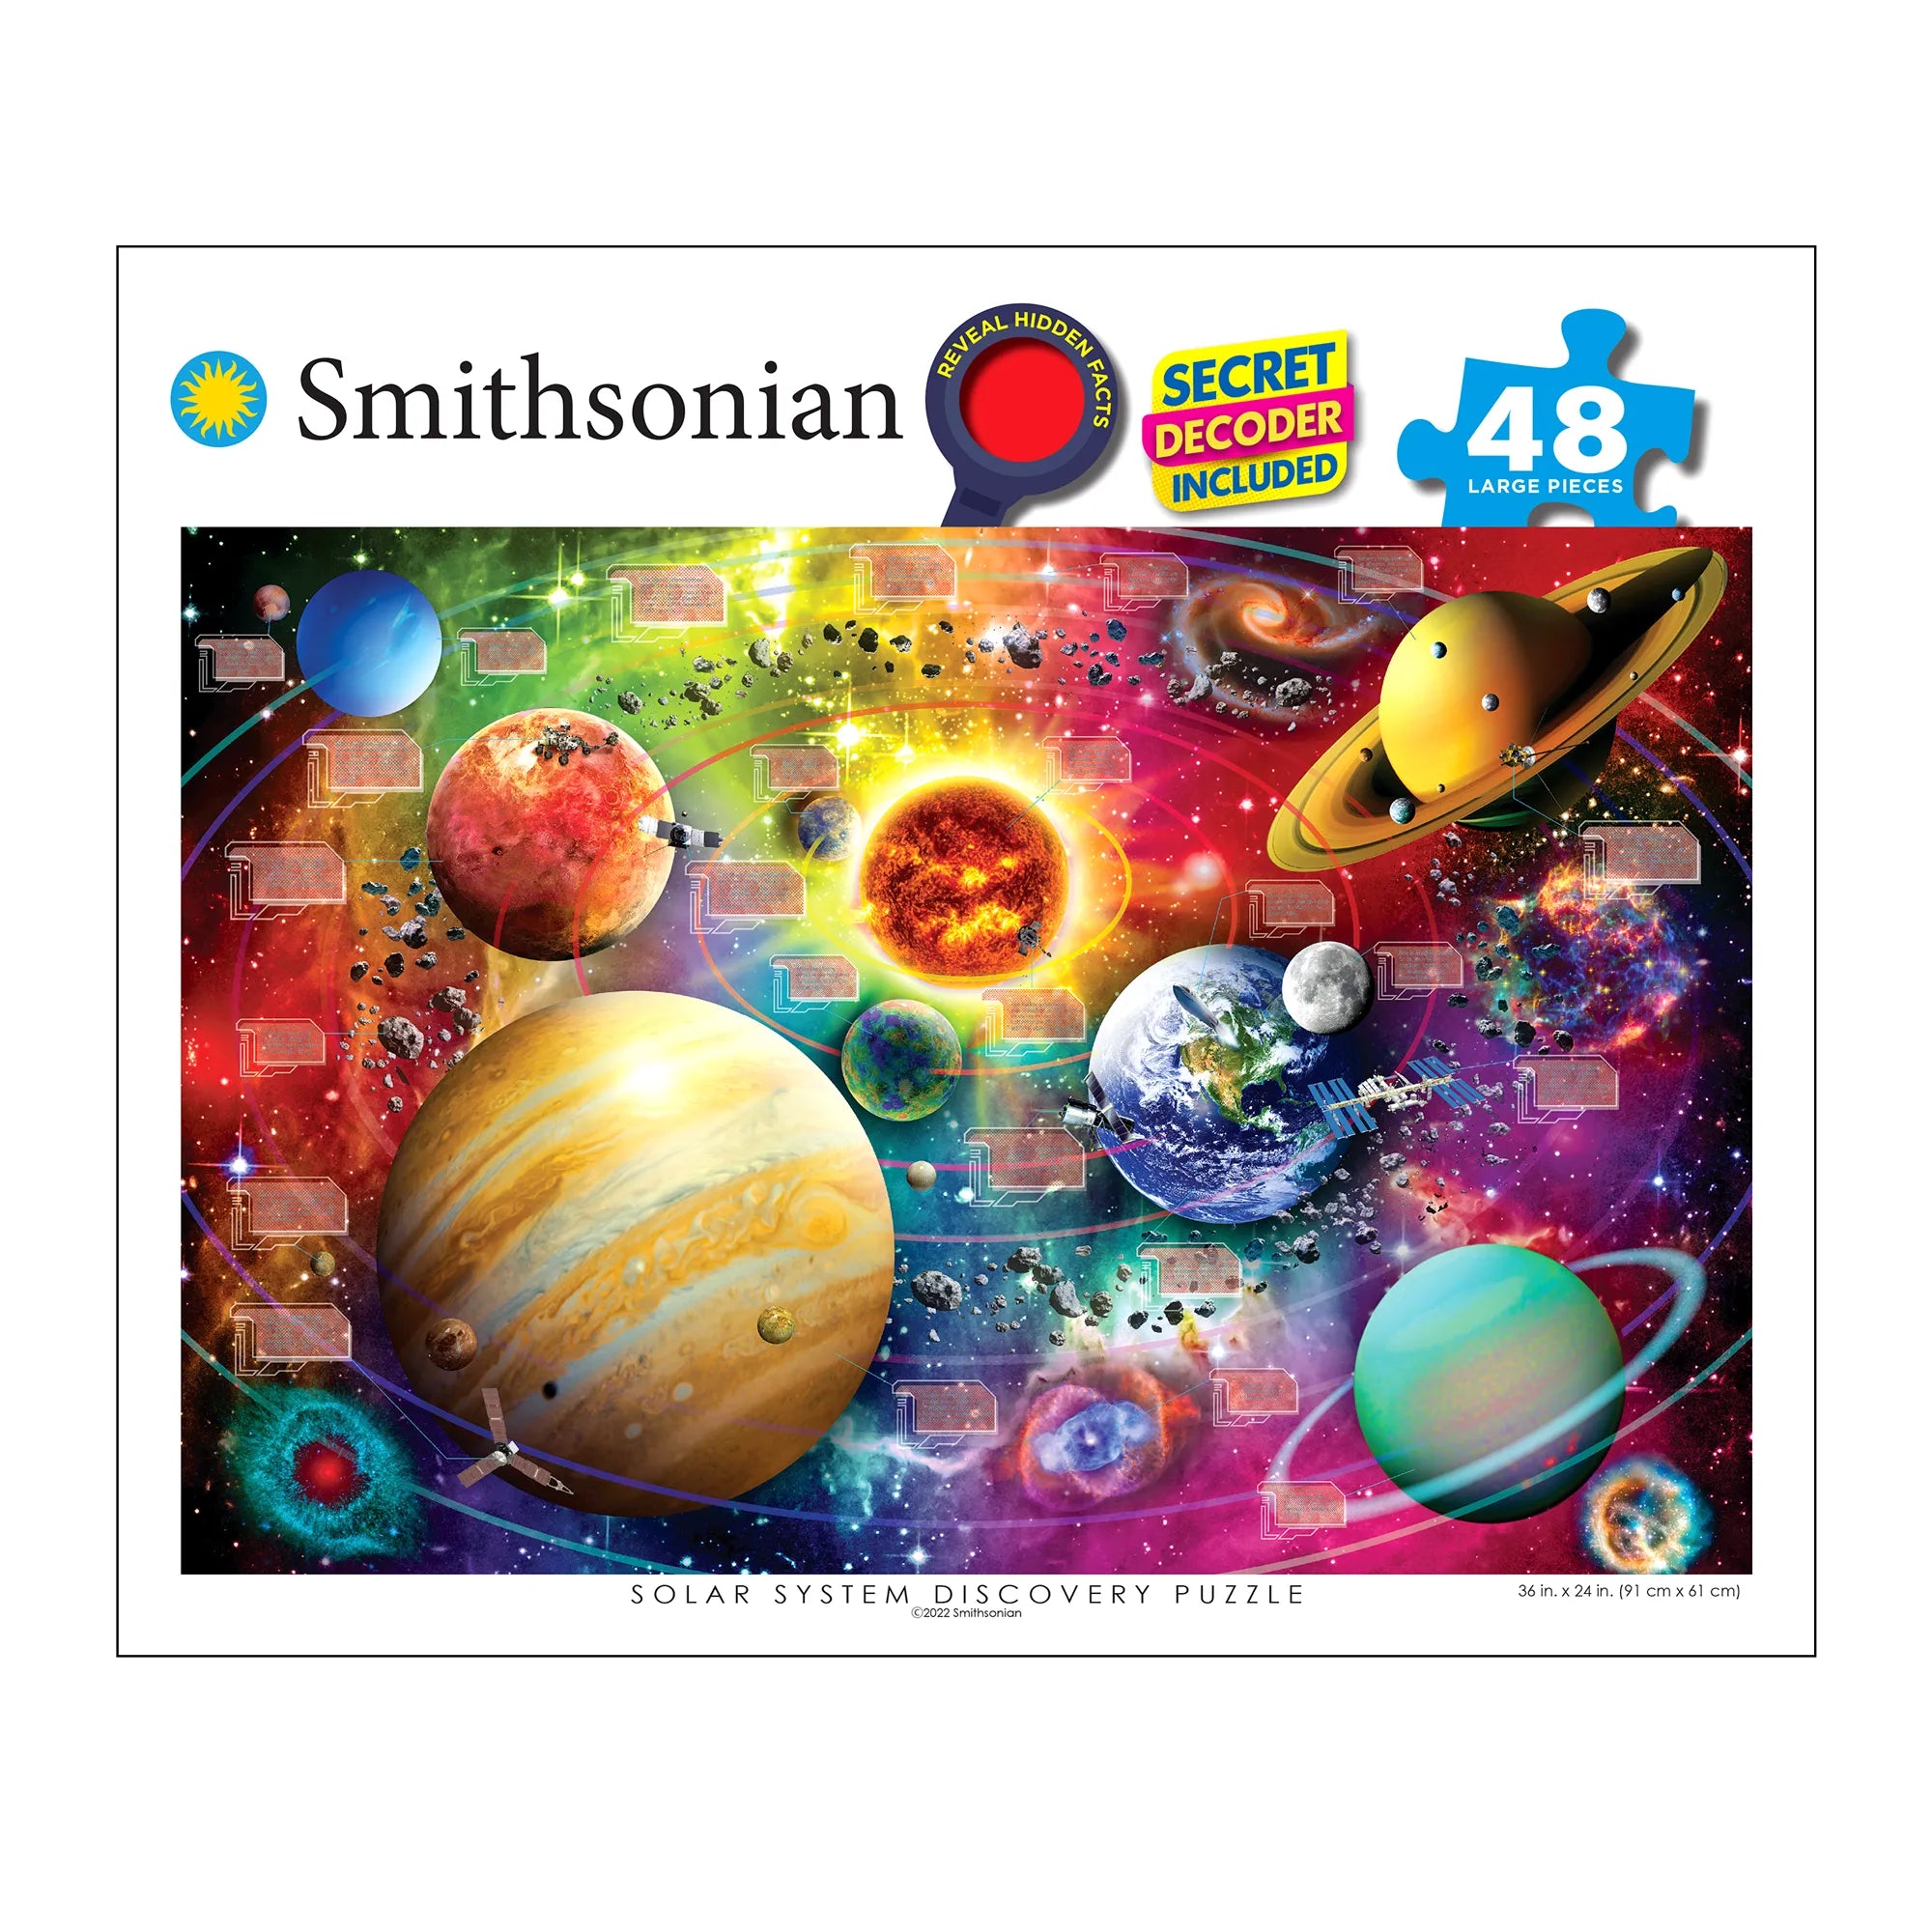 Smithsonian Solar System Discovery Puzzle - Ages 6+ - Brown's Hobby & Game